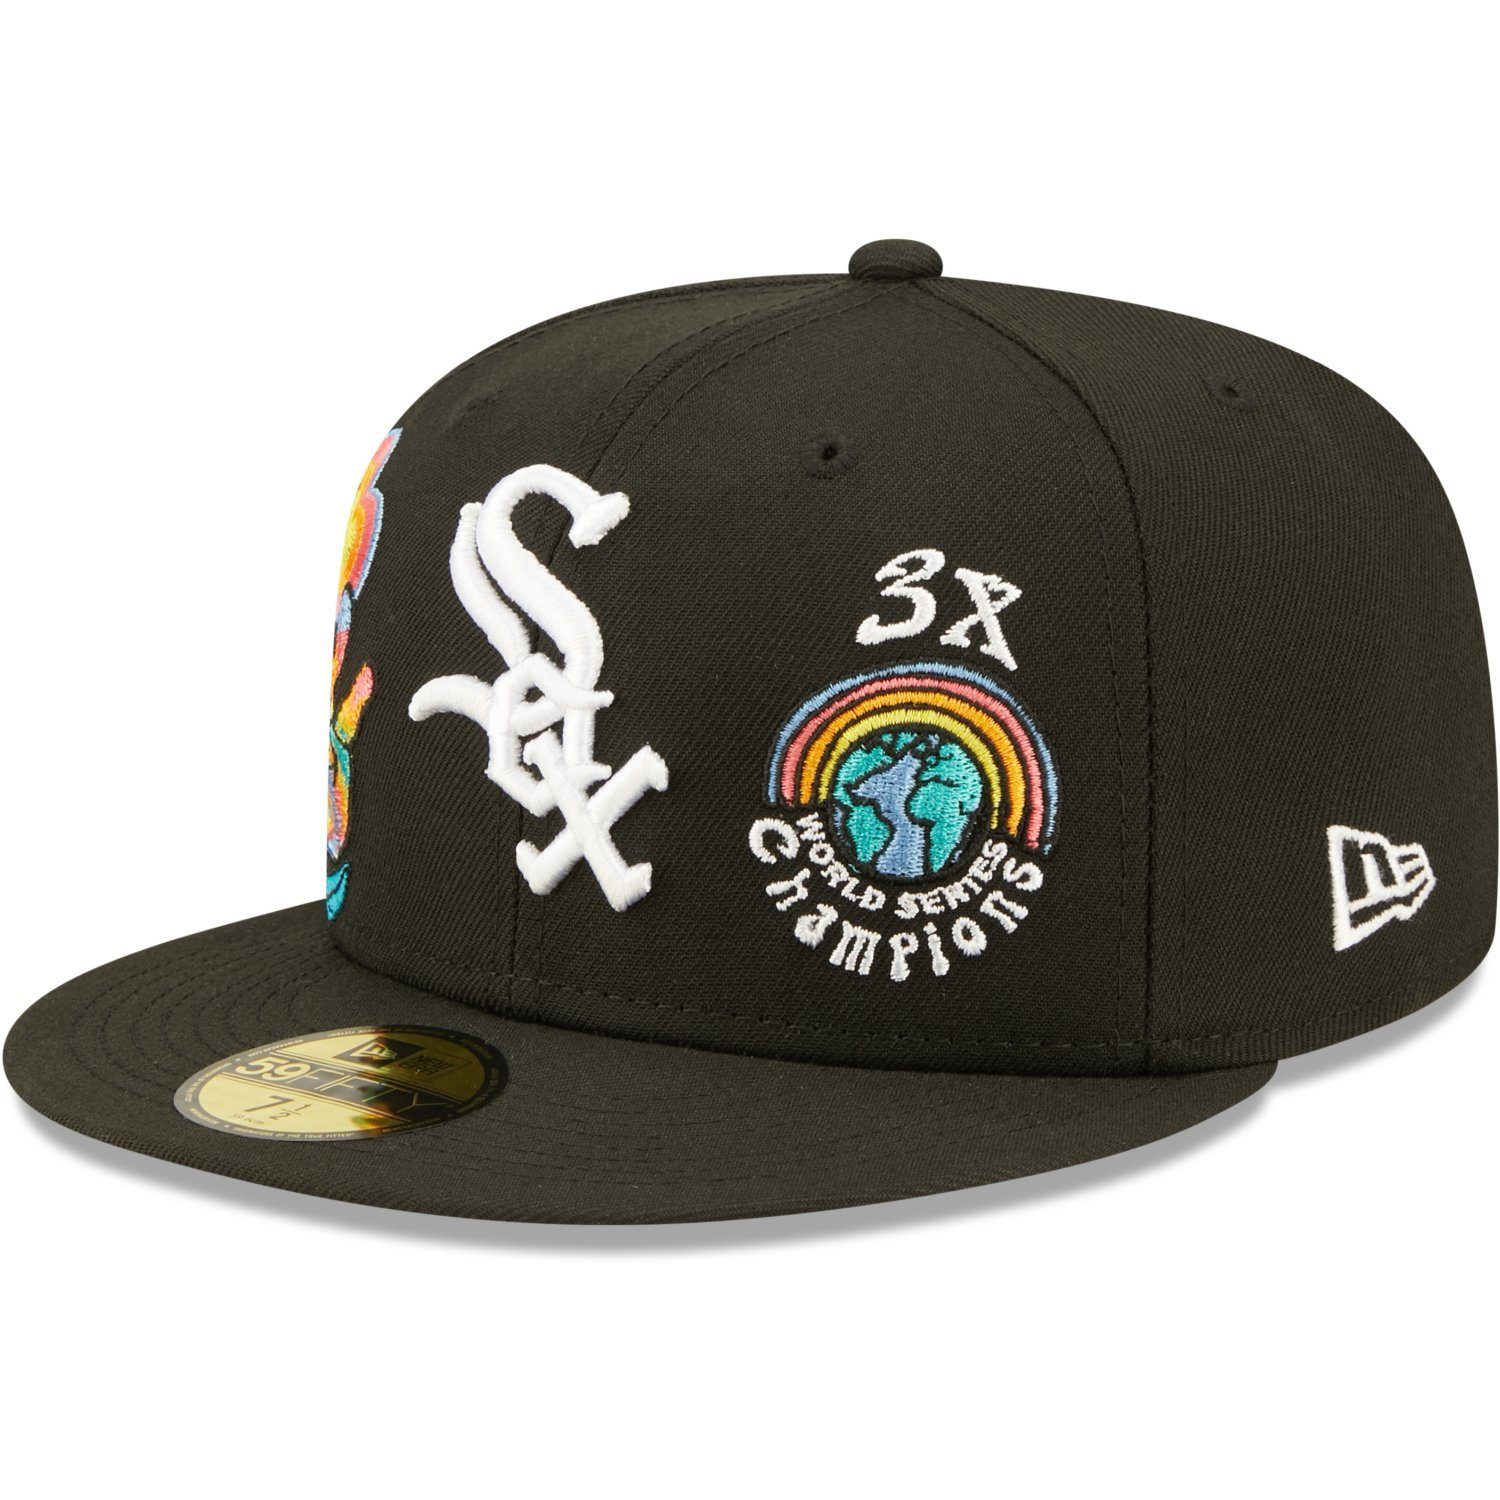 New Era Fitted Cap 59Fifty Sox GROOVY Chicago White